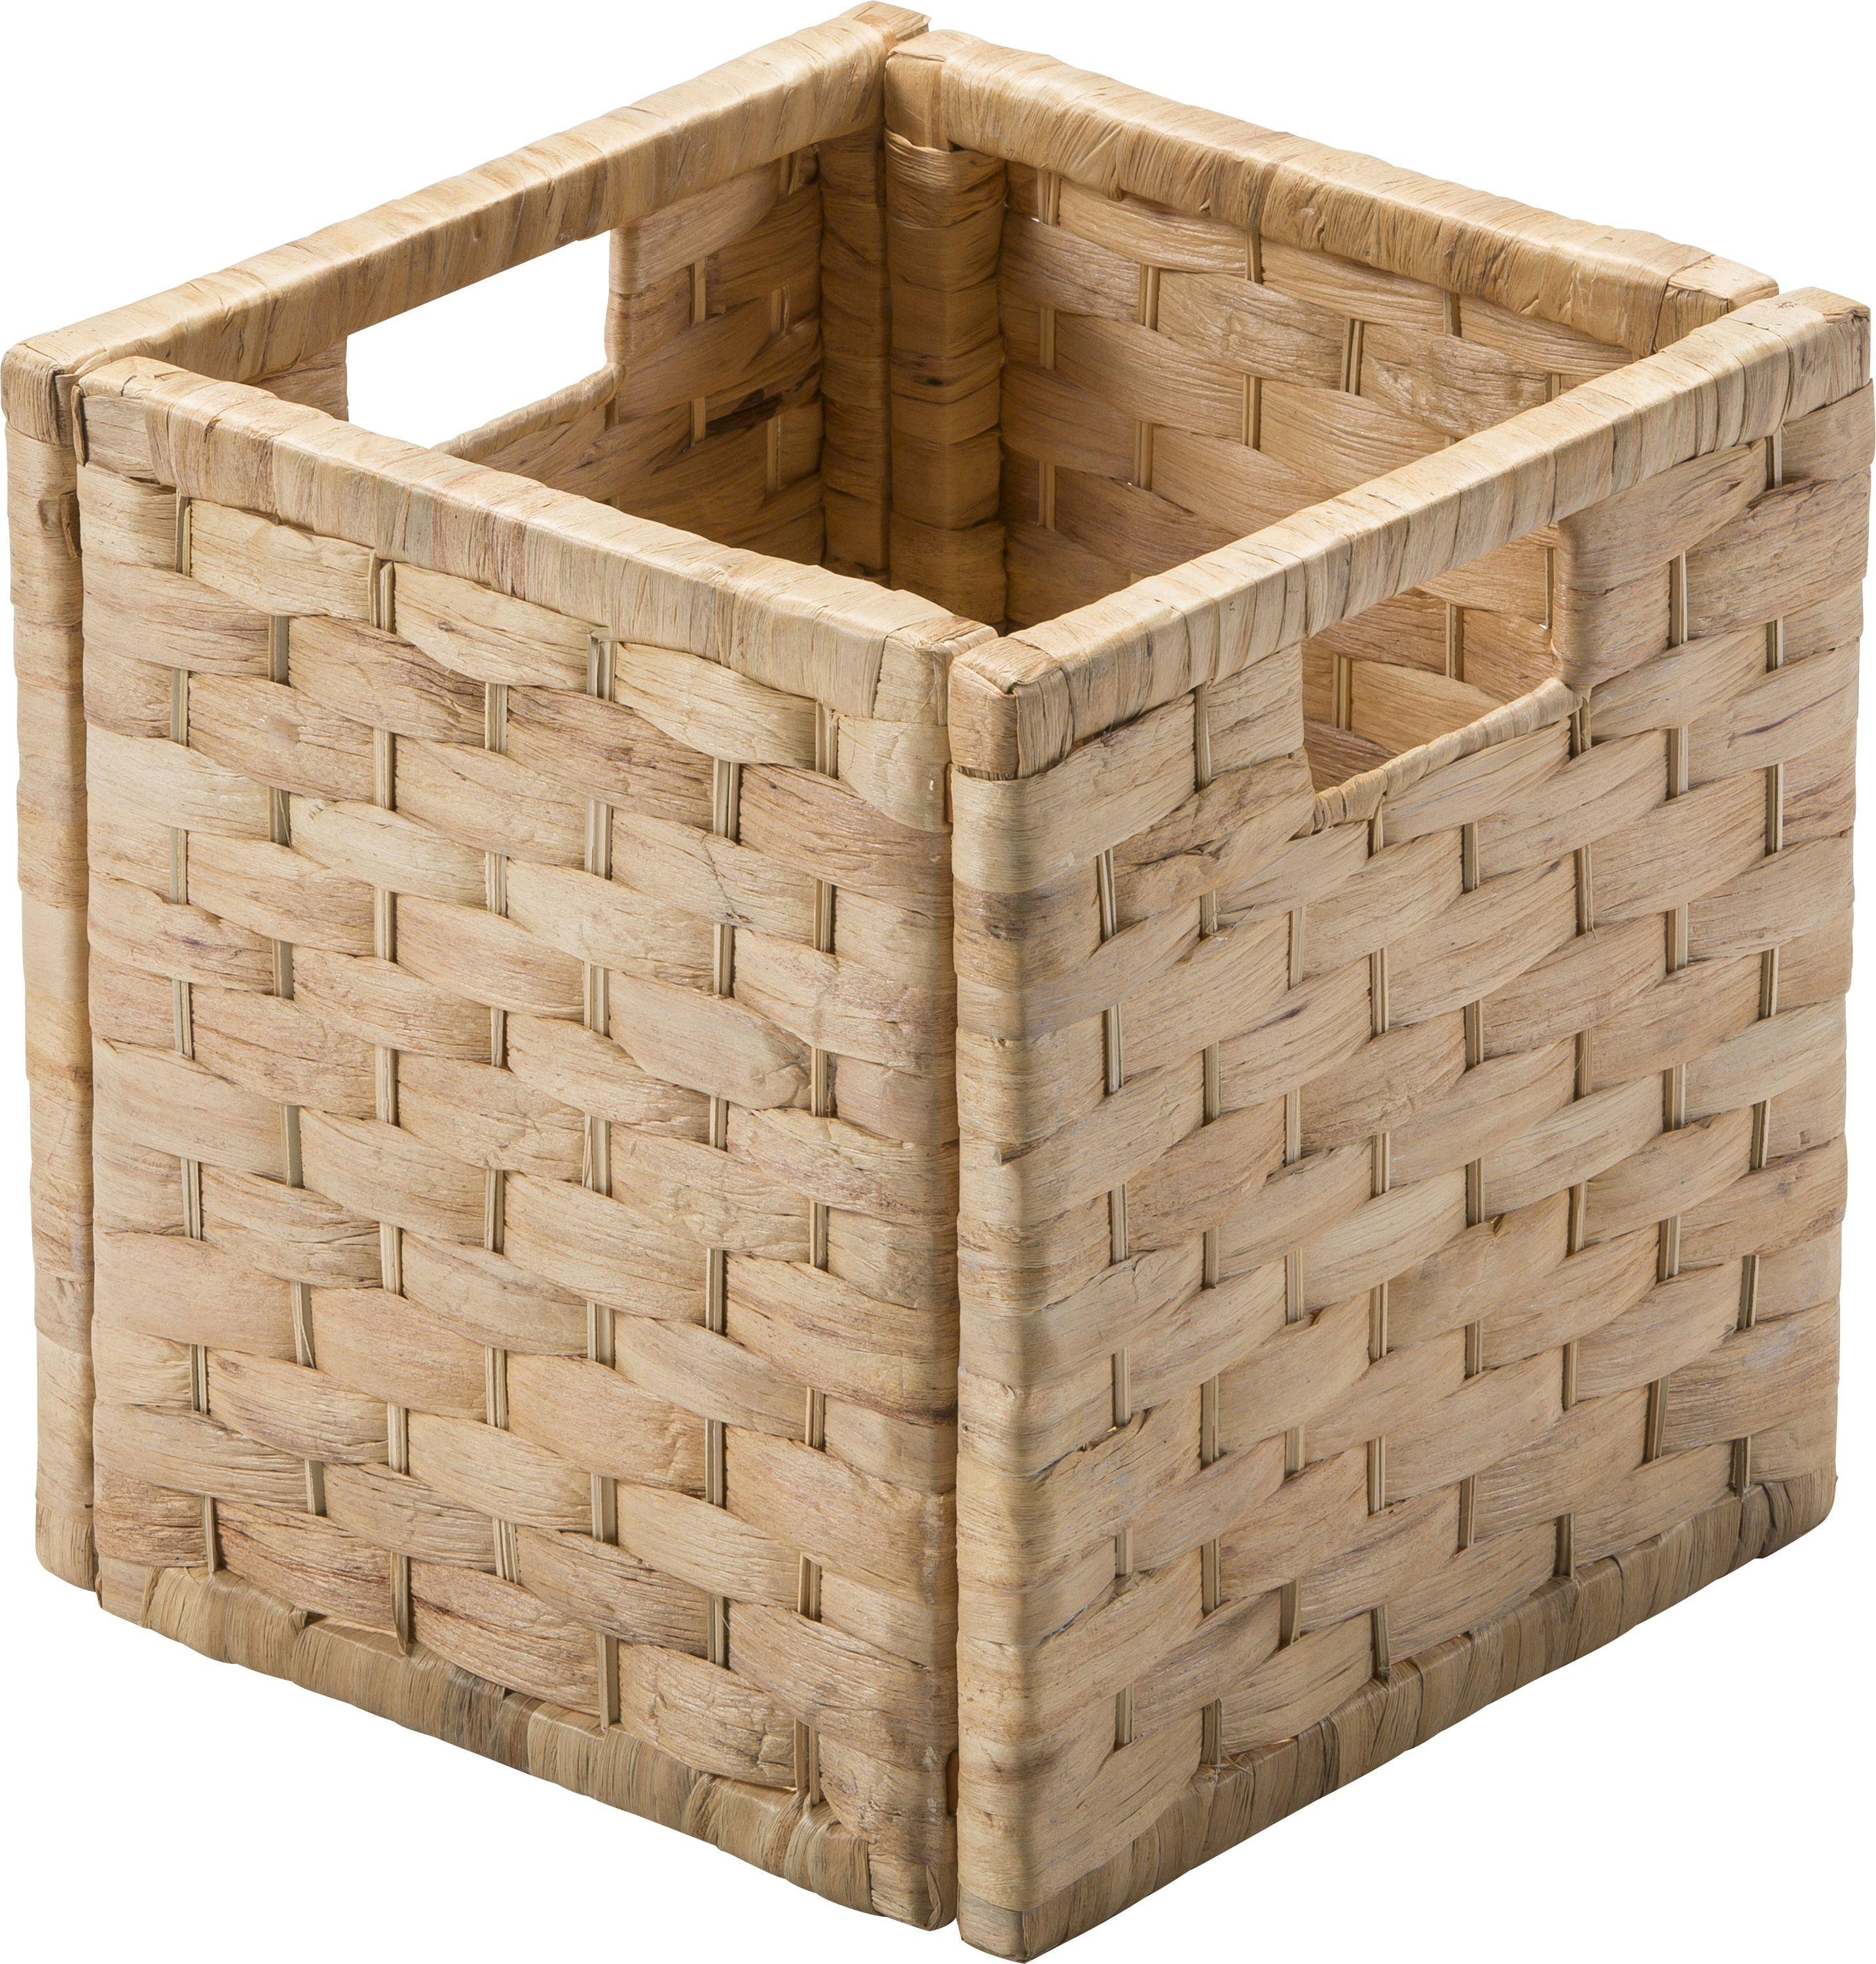 Argos Home Water Hyacinth Cubed Storage Basket - Small Weave